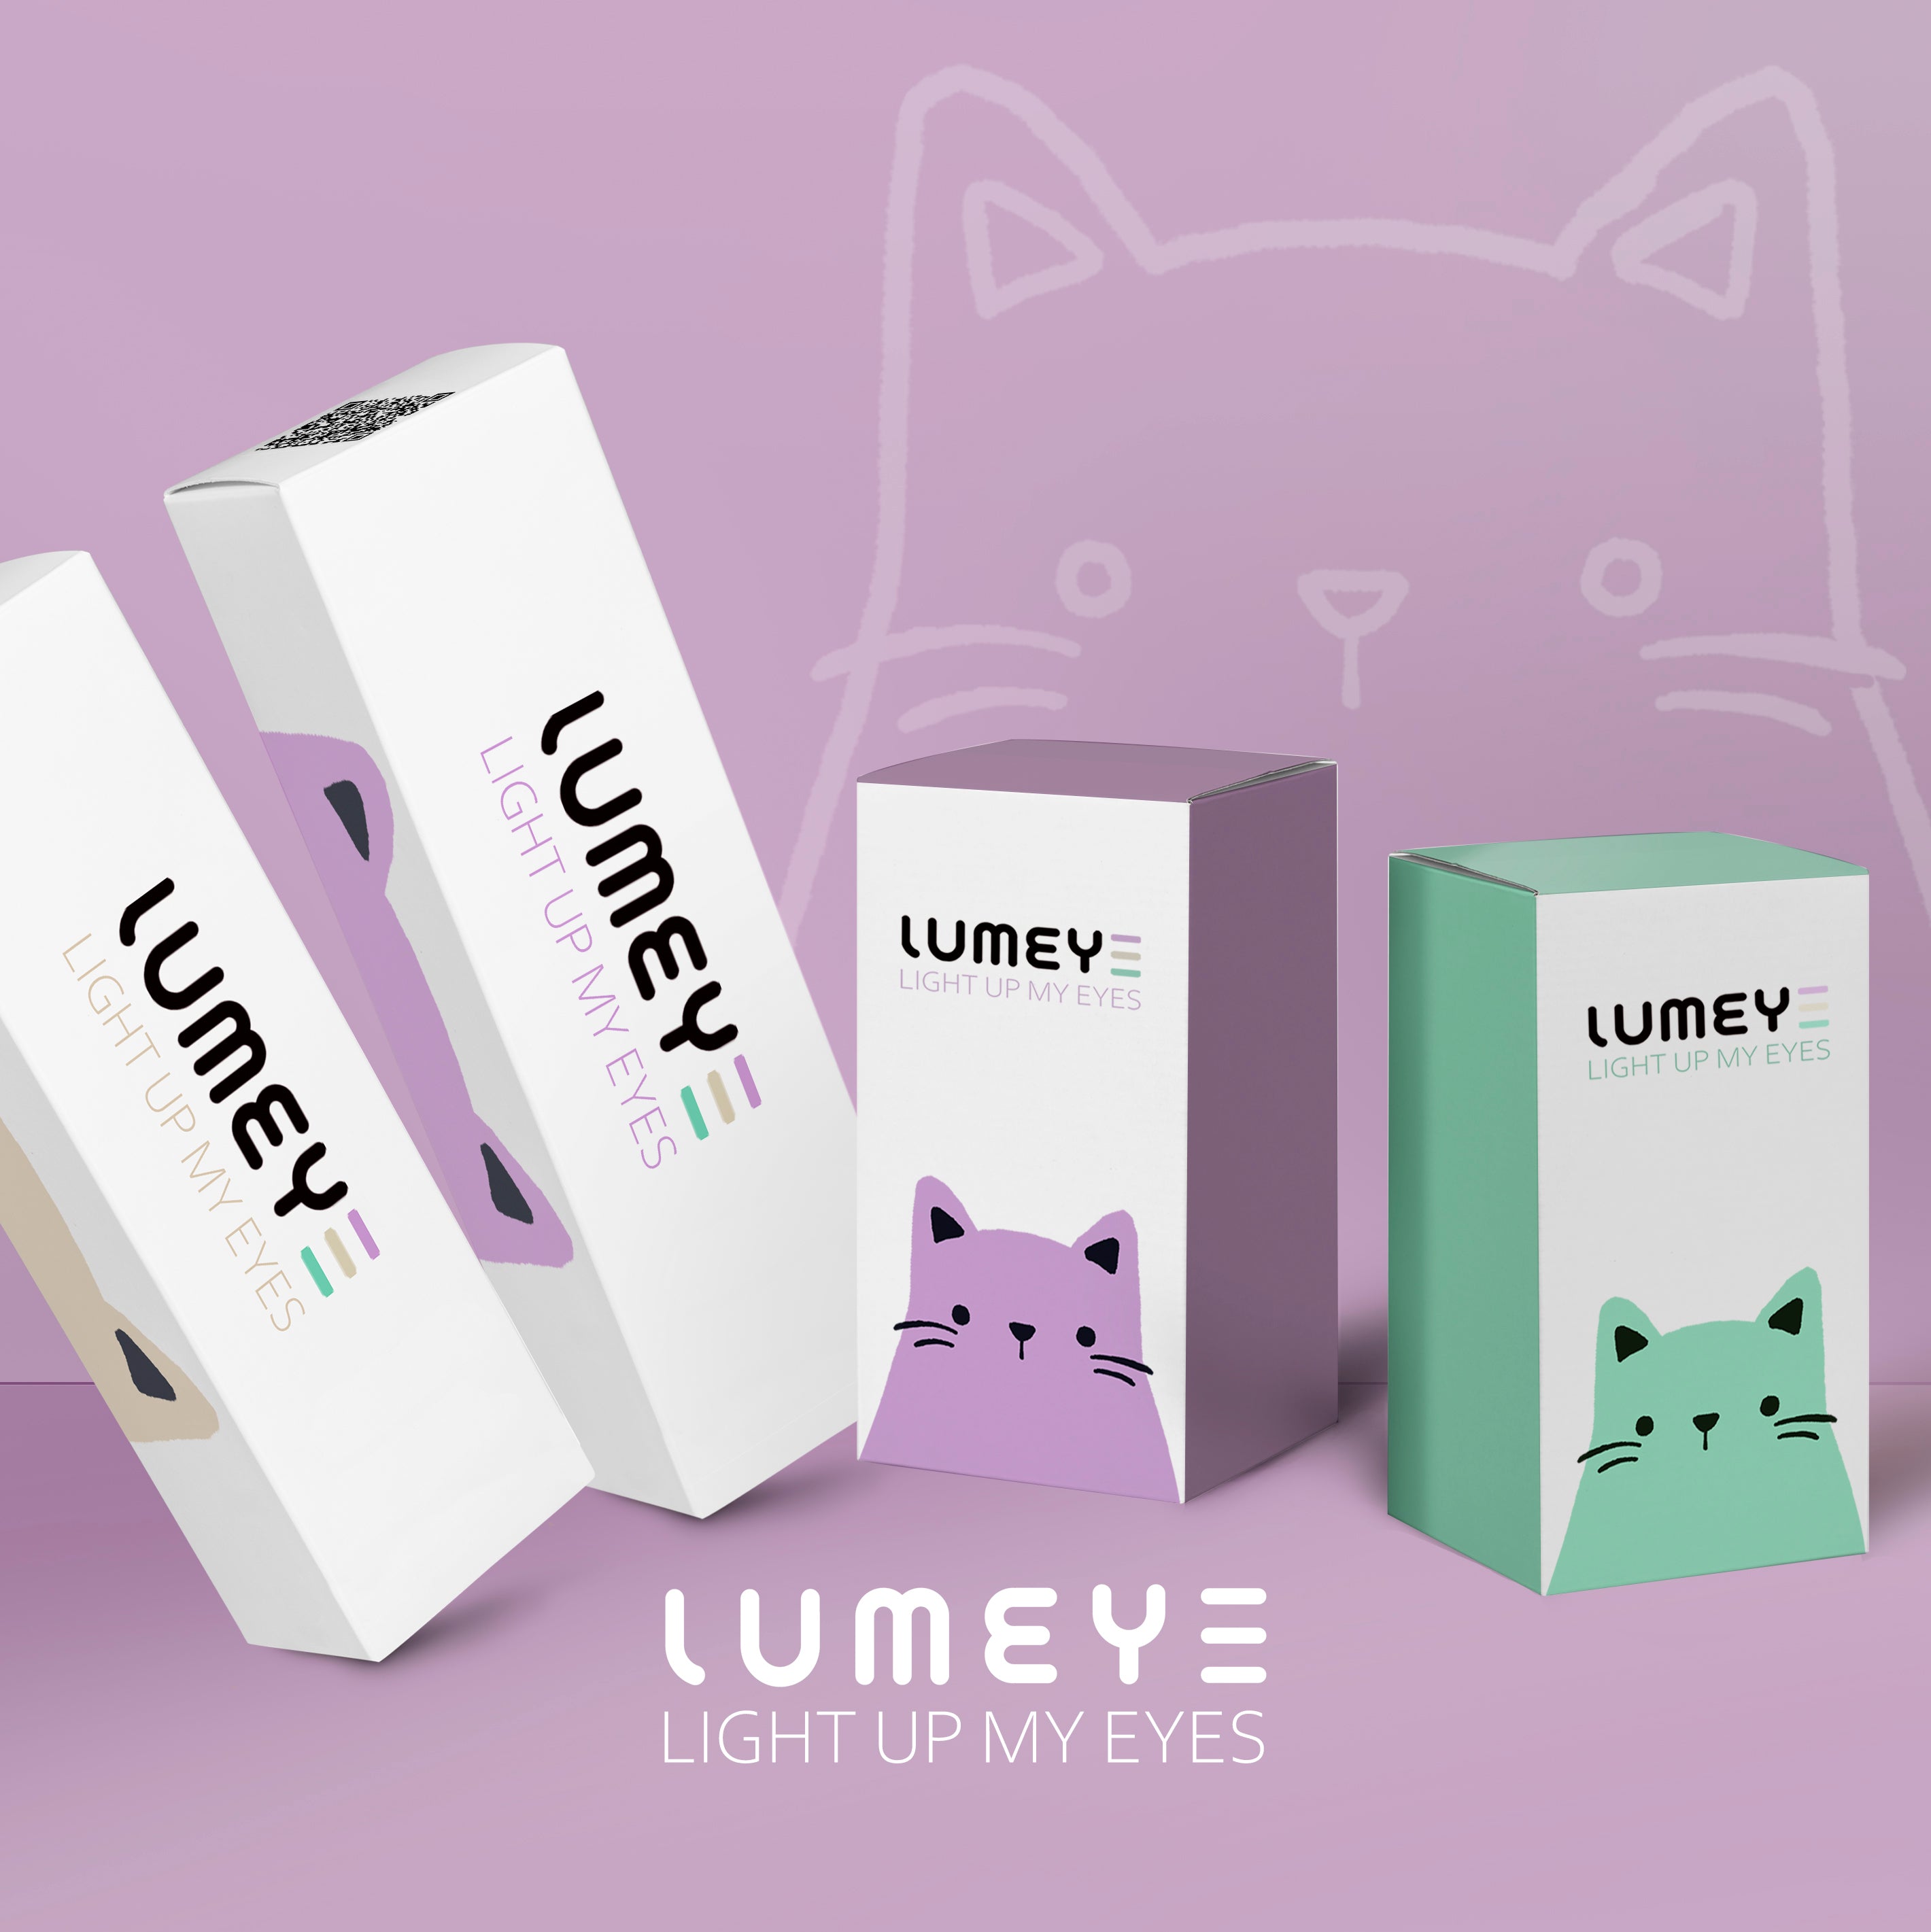 Best COLORED CONTACTS - LUMEYE Amber Moon Brown Colored Contact Lenses - LUMEYE